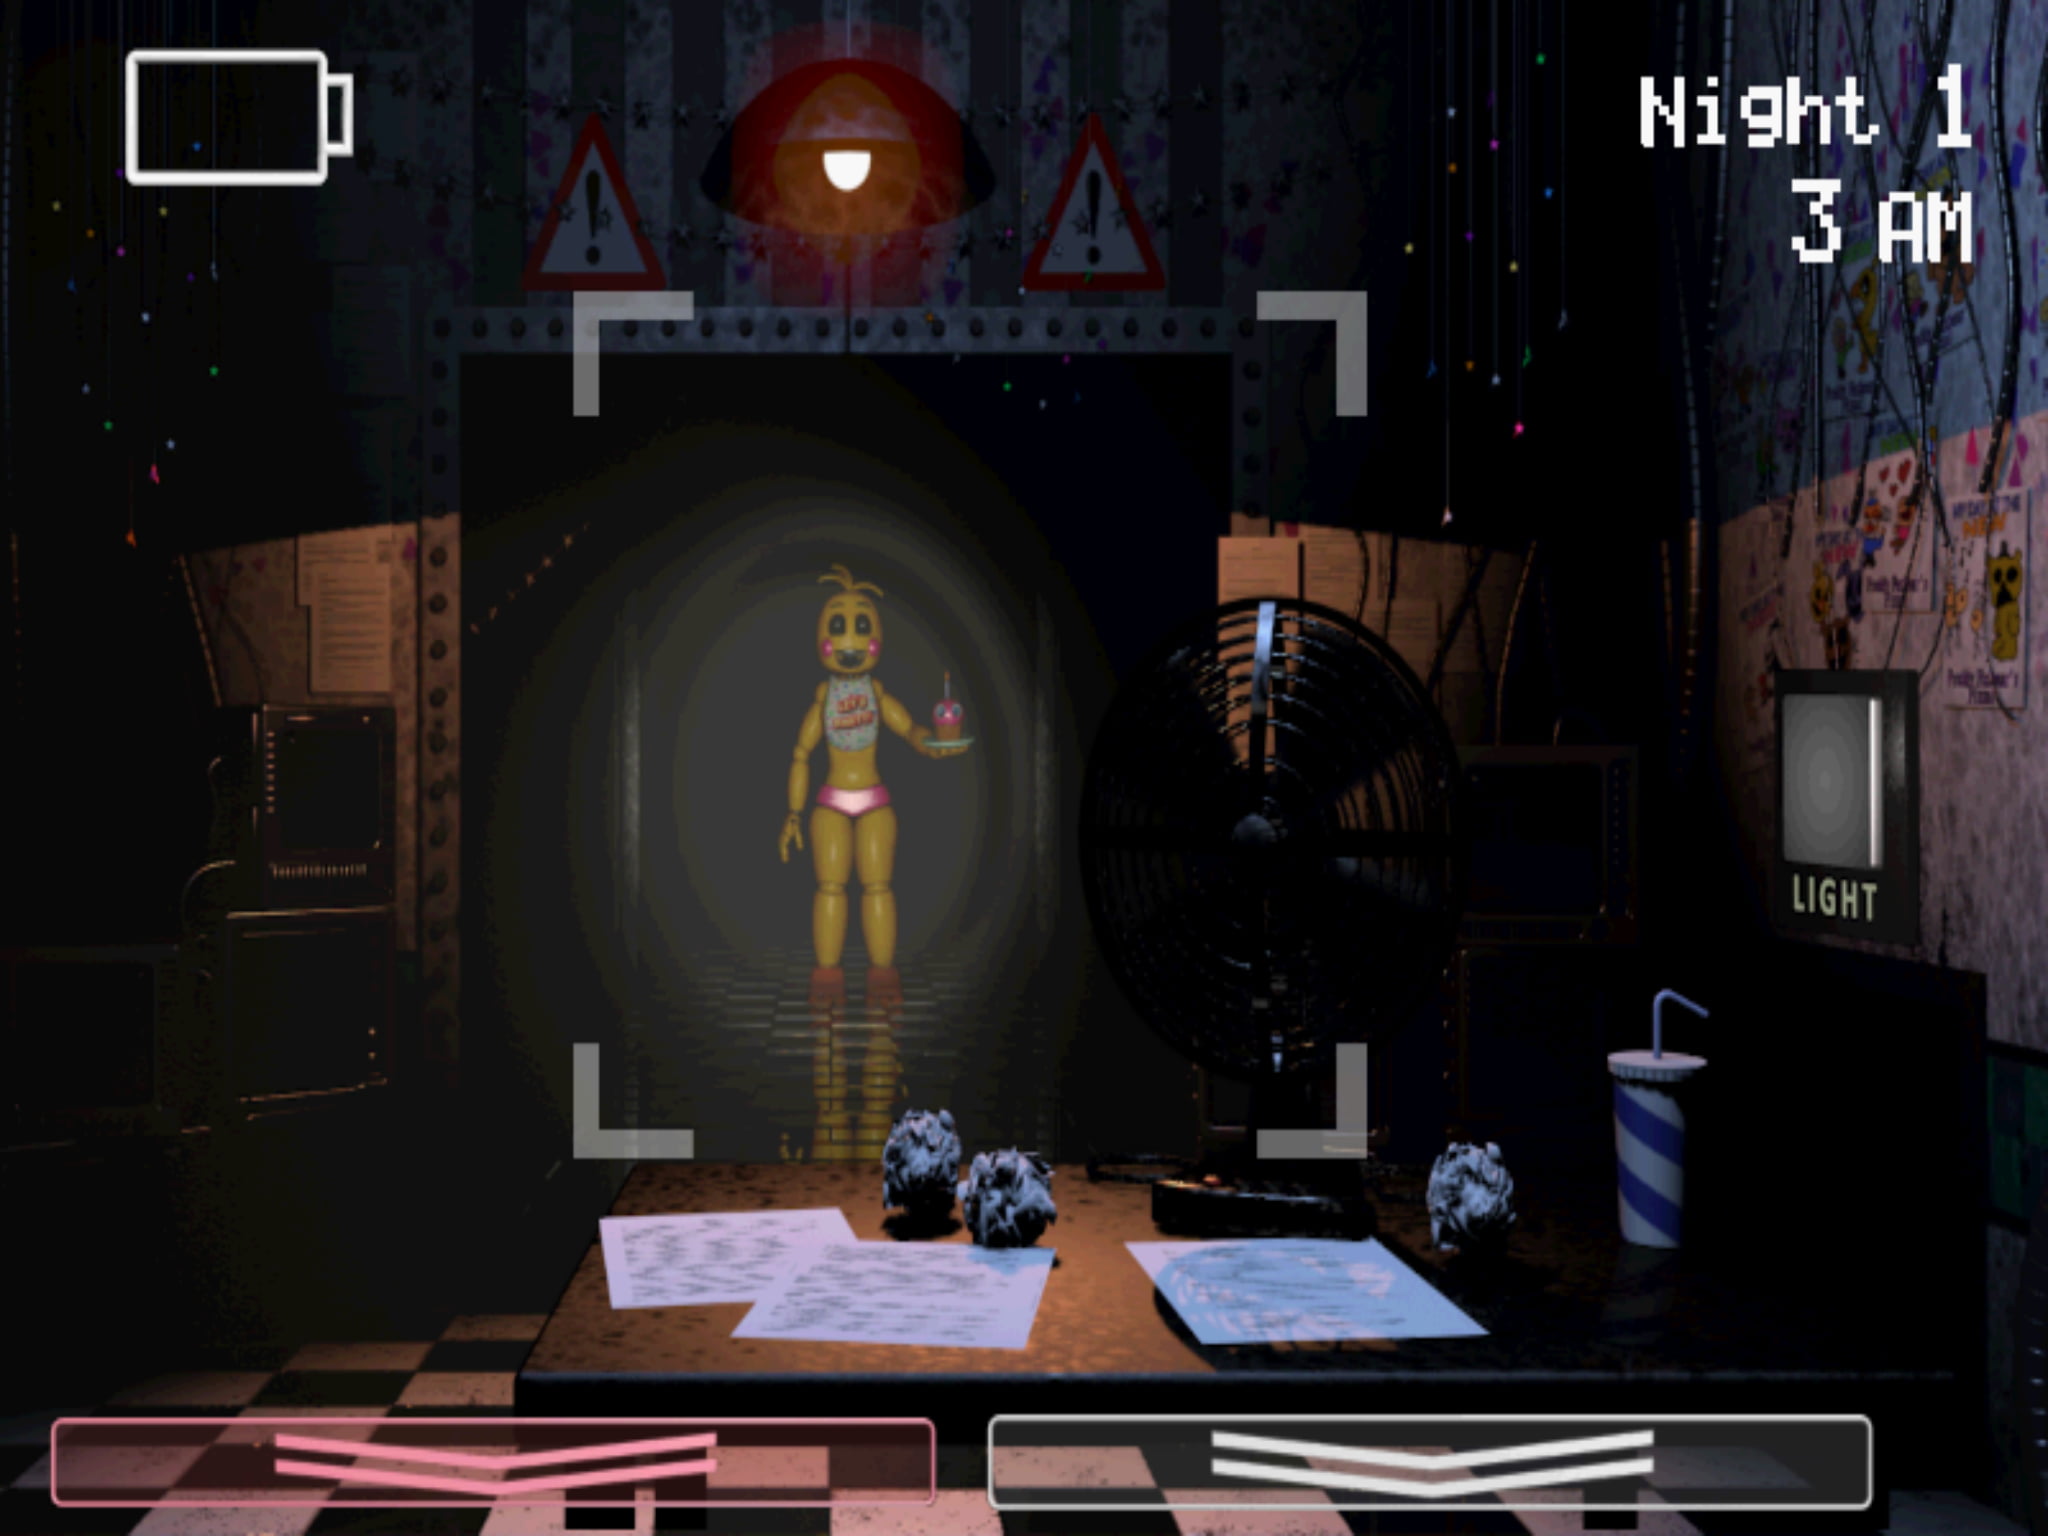 five nights at freddy's wallpaper,action adventure game,pc game,adventure game,screenshot,games